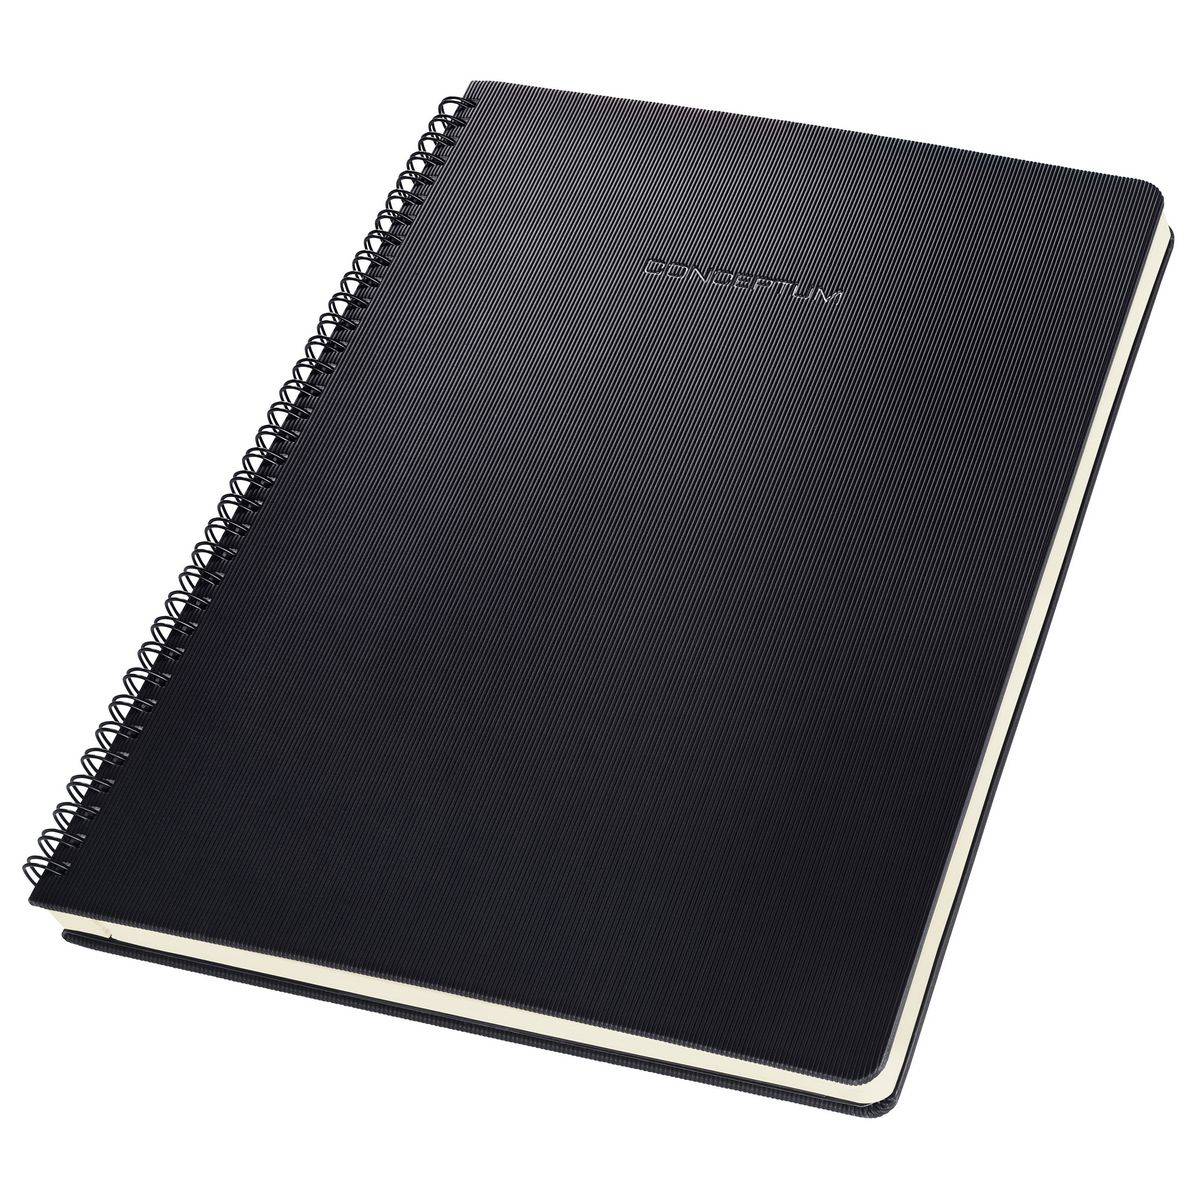 Photos - Notebook Sigel CONCEPTUM writing  A4 160 sheets Black CO821 